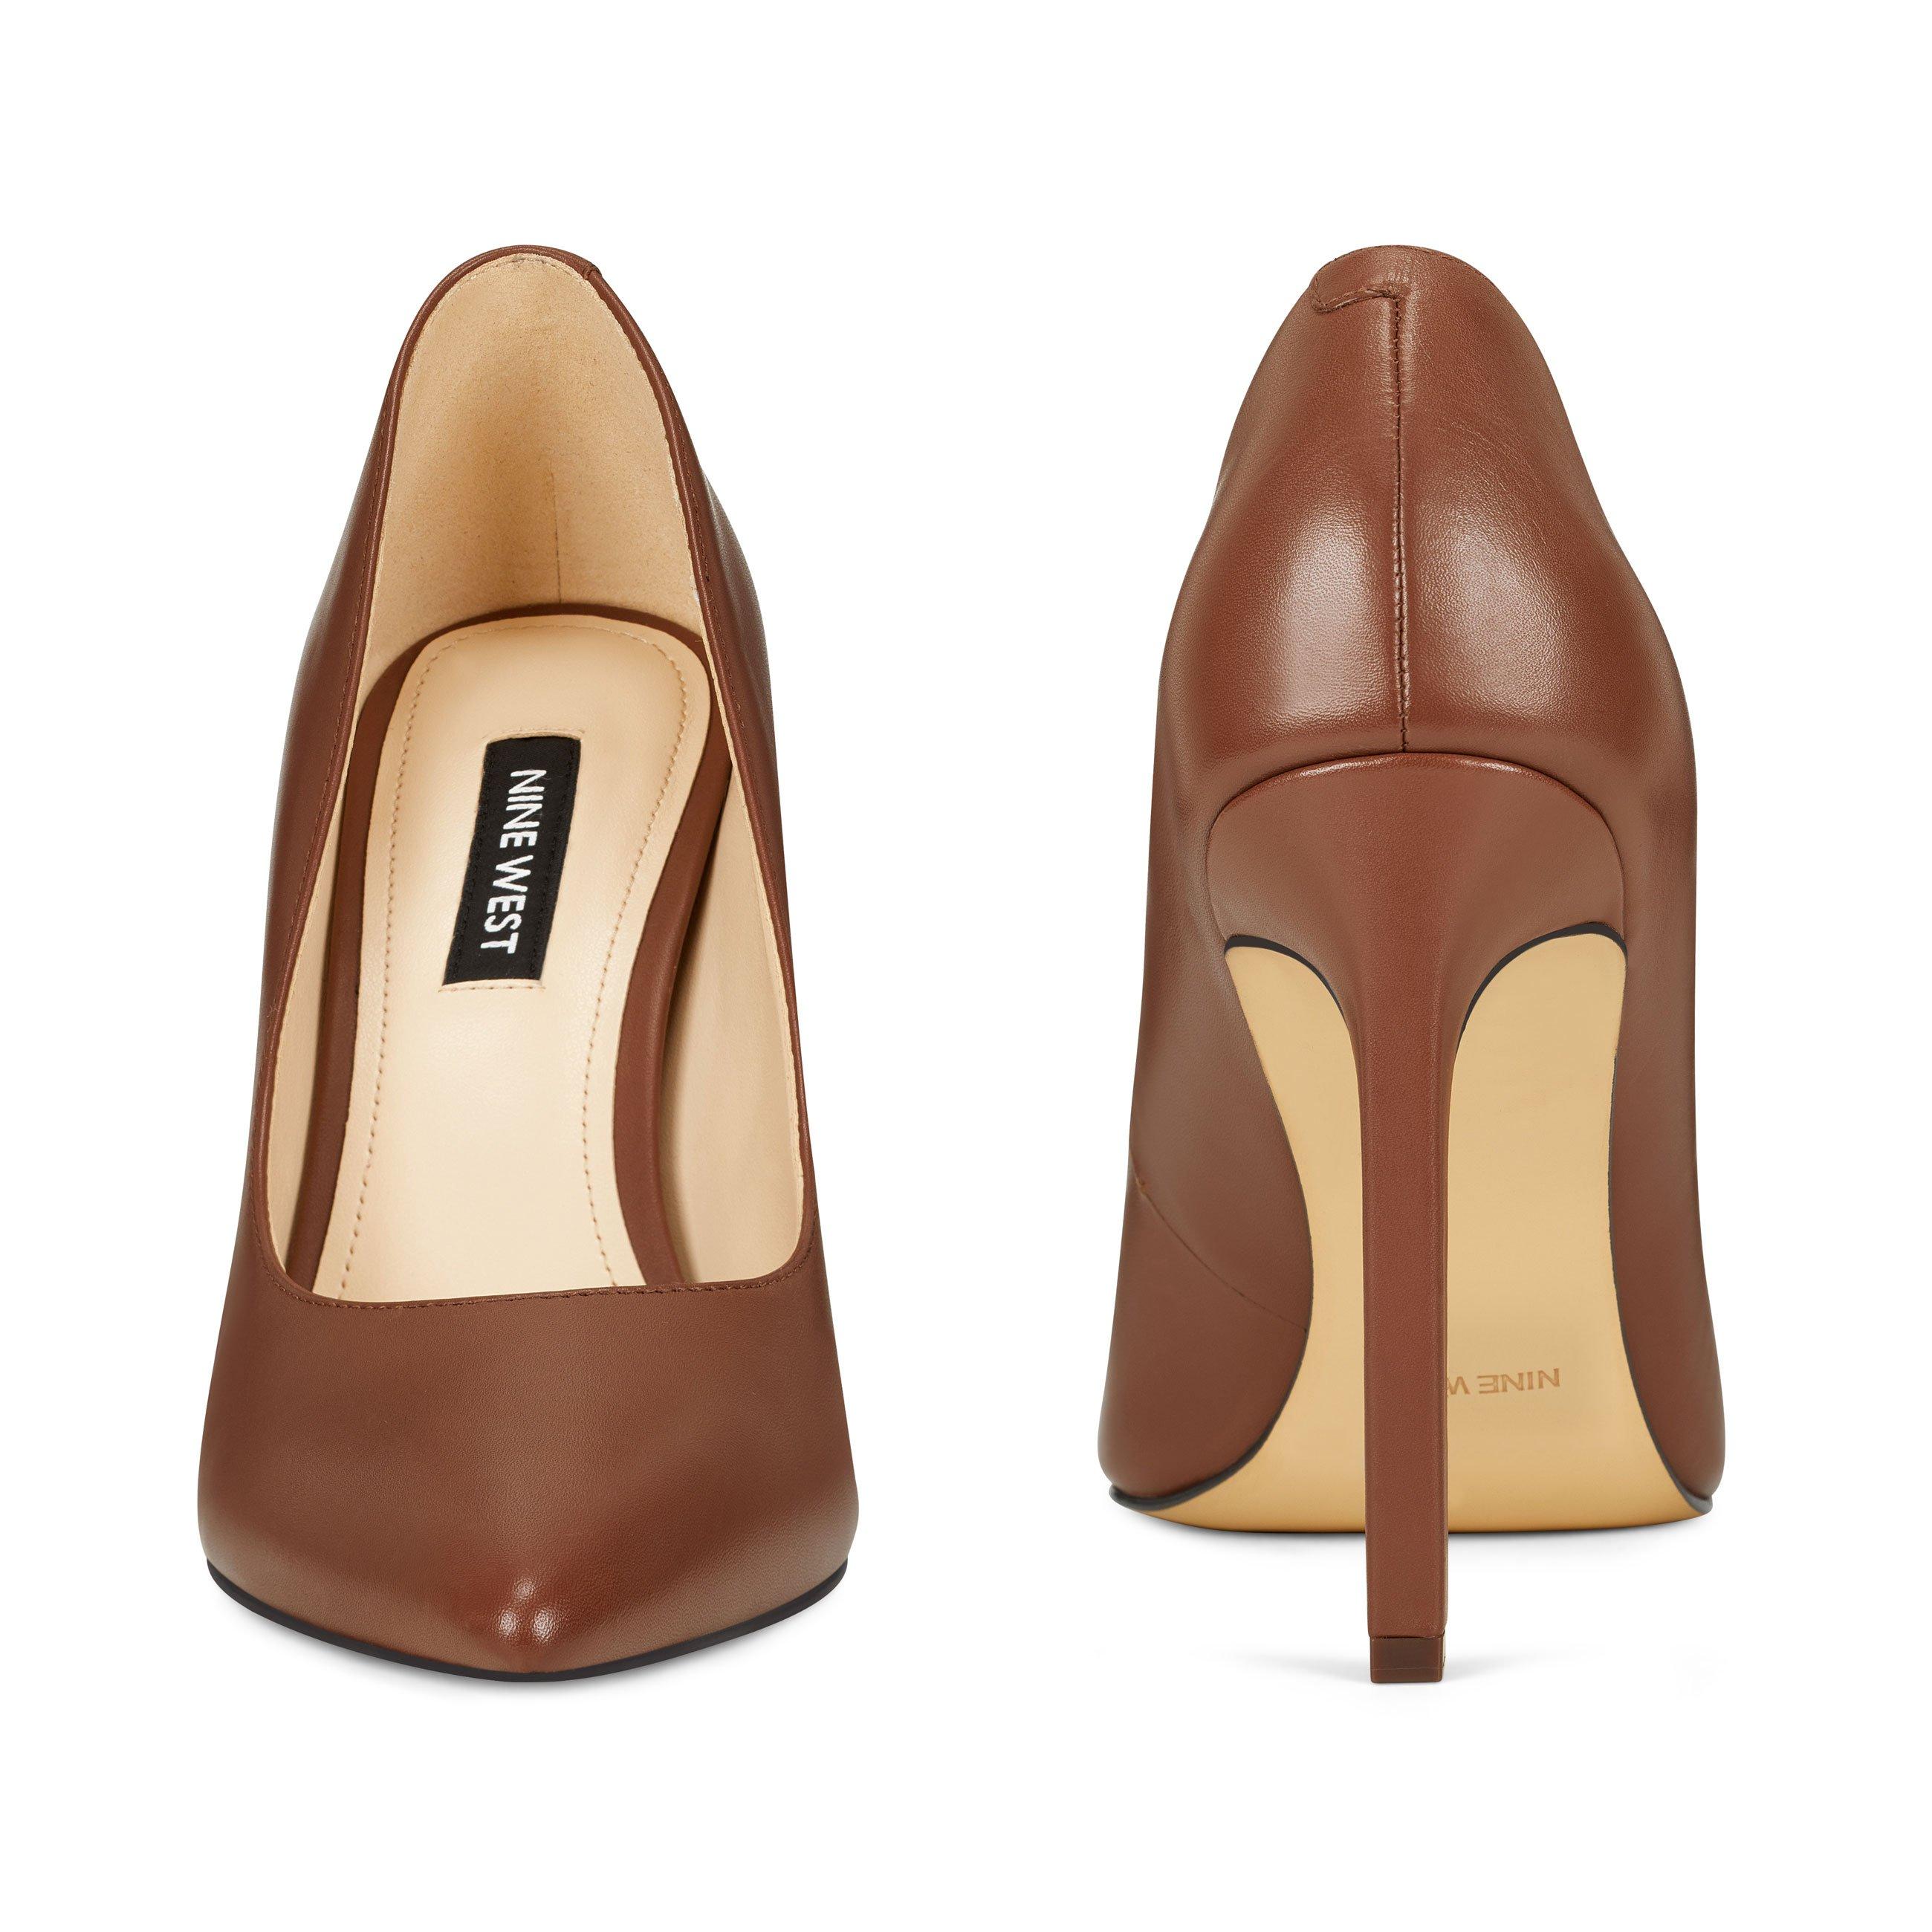 Nine West Silk Tatiana Pointy Toe Pumps in Brown Leather (Brown) - Lyst